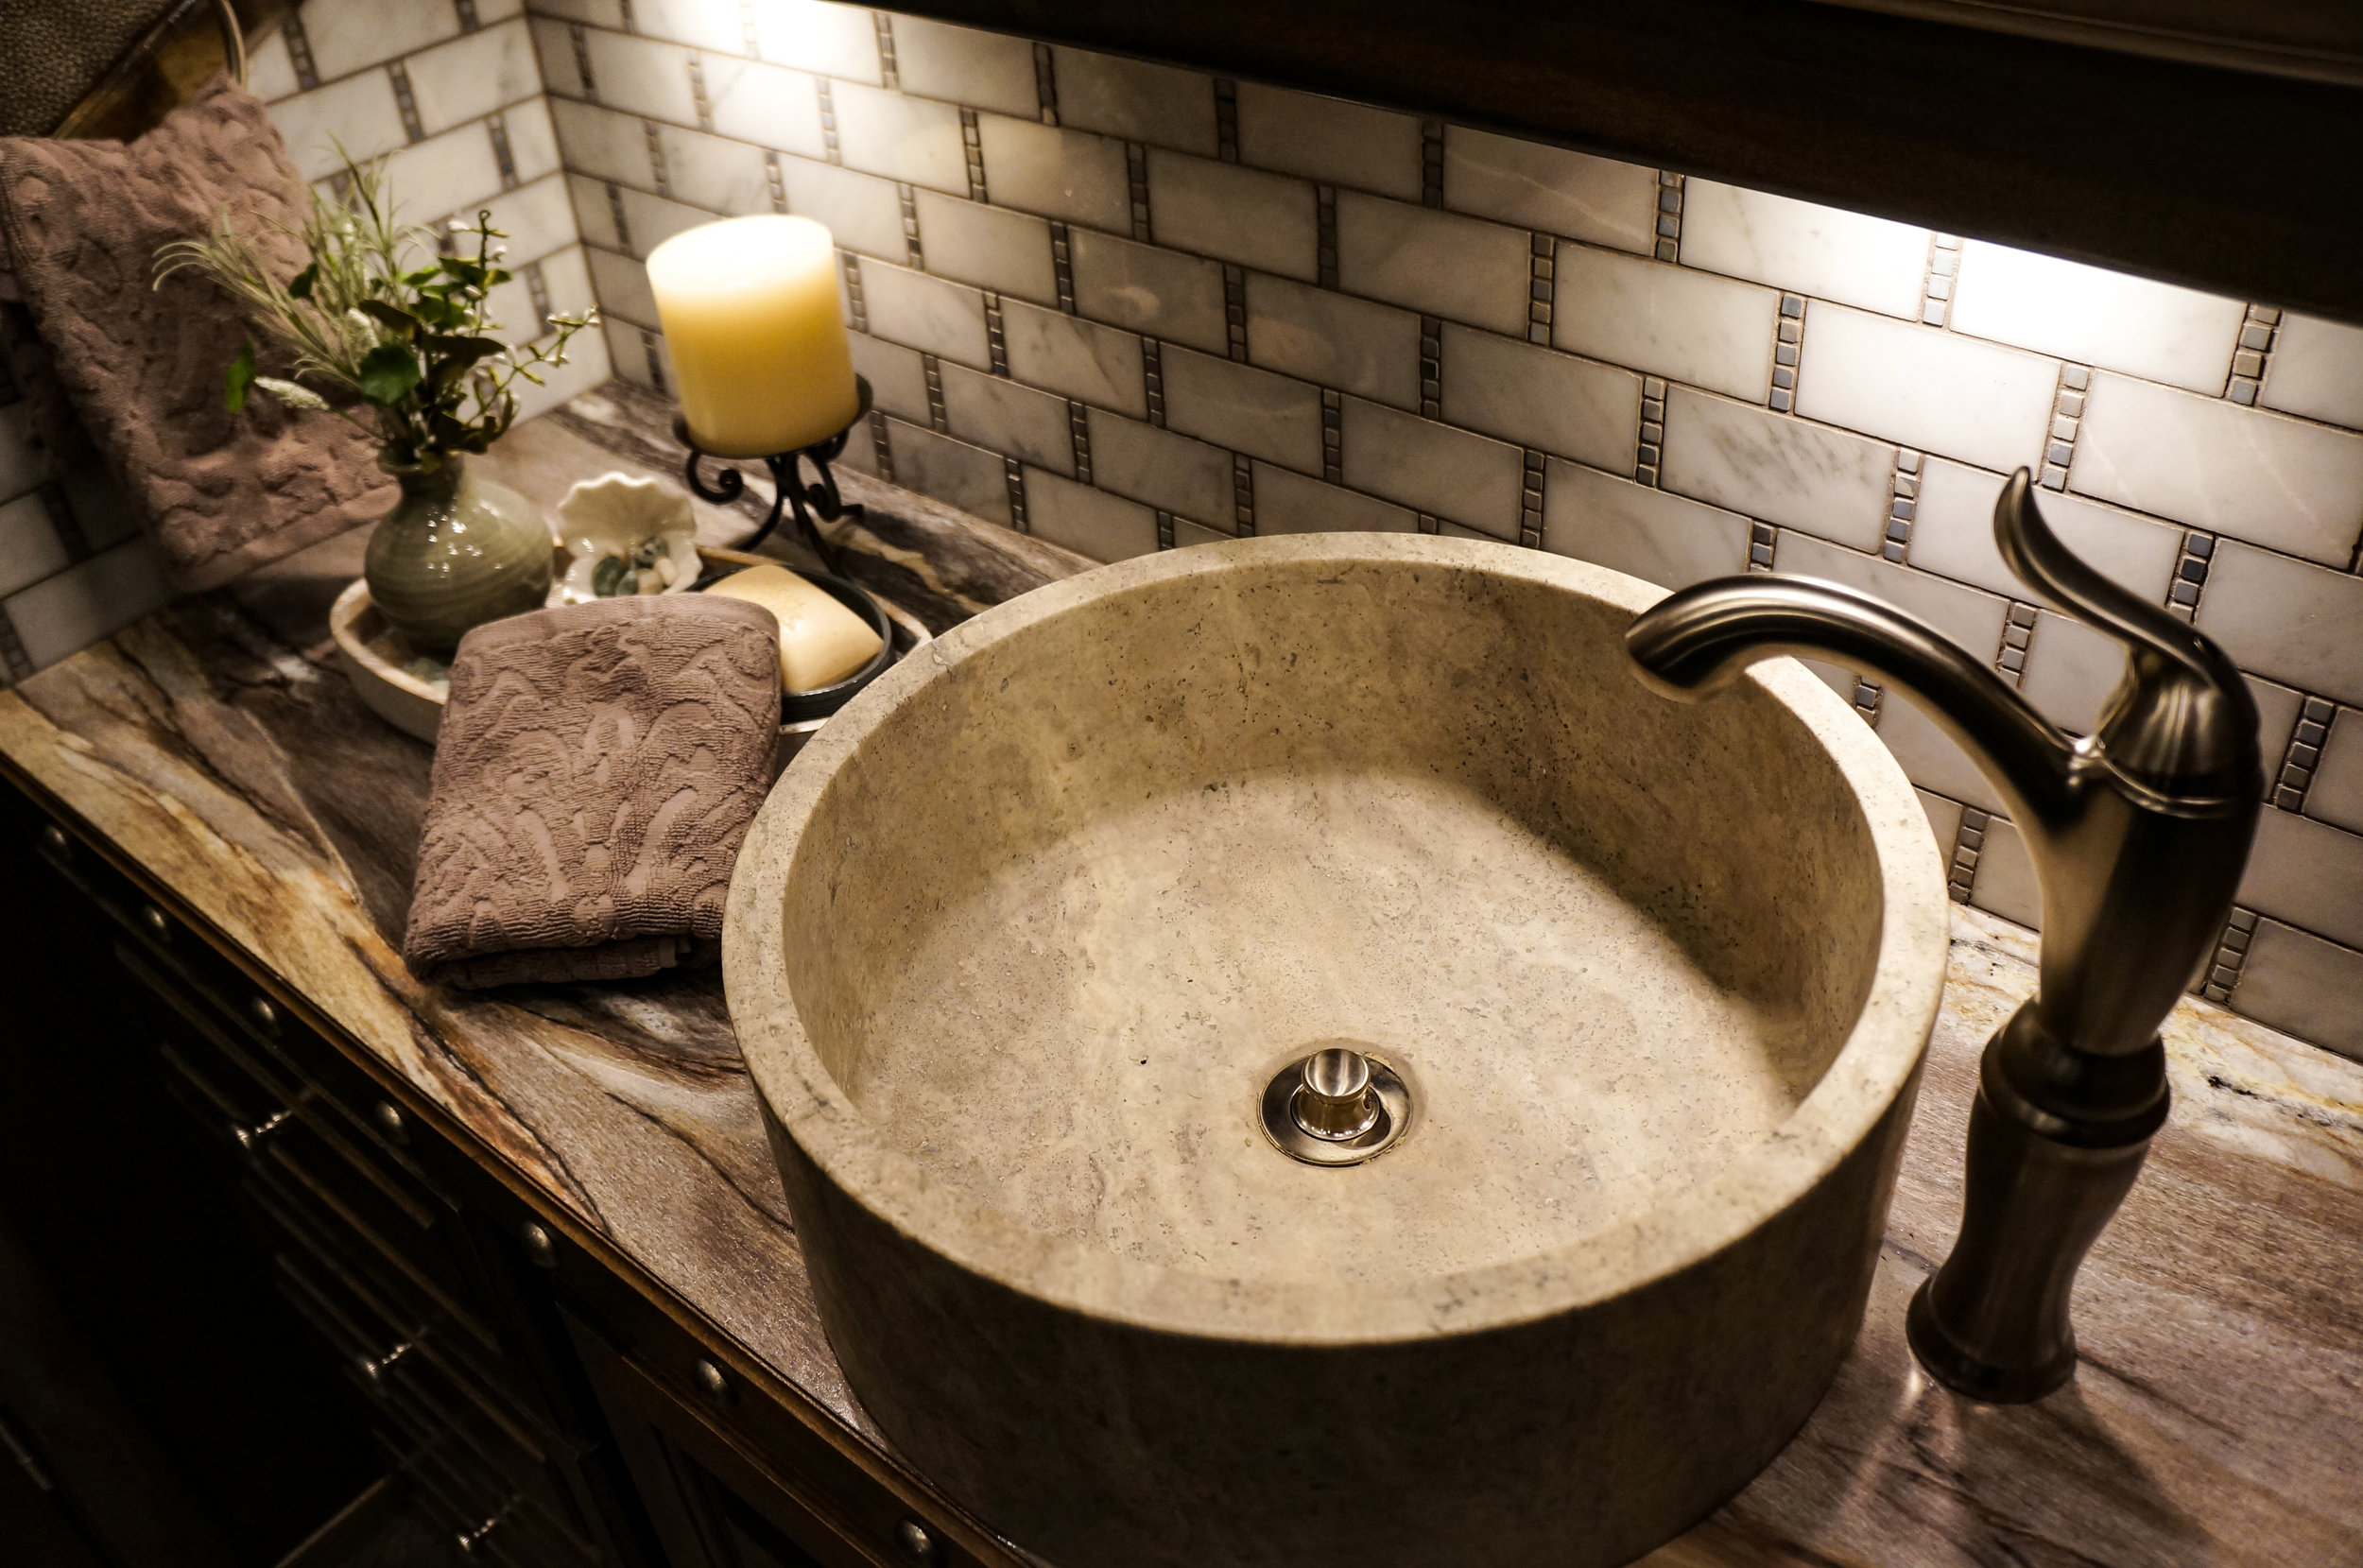 Stone Vessle Sink with Nickel Faucet